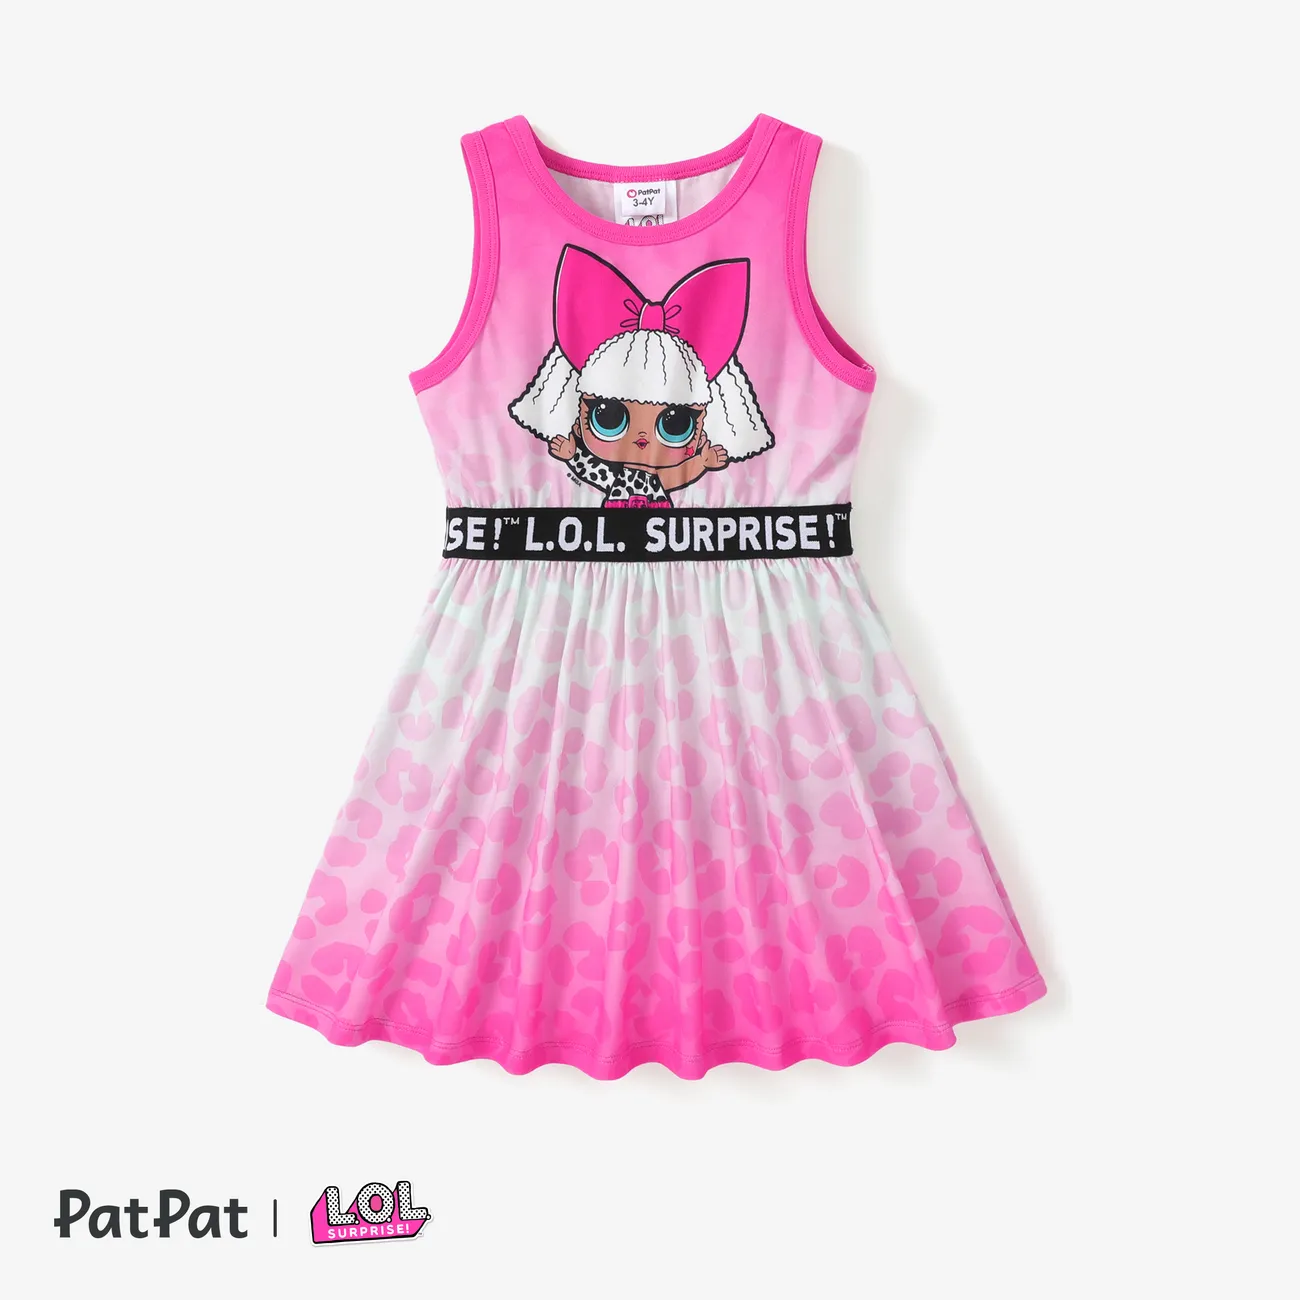 L.O.L. SURPRISE! Toddler/Kid Girls 1pc Web Gradient Pattern Sleeveless Checkerboard All-over Pattern Dress PINK-1 big image 1